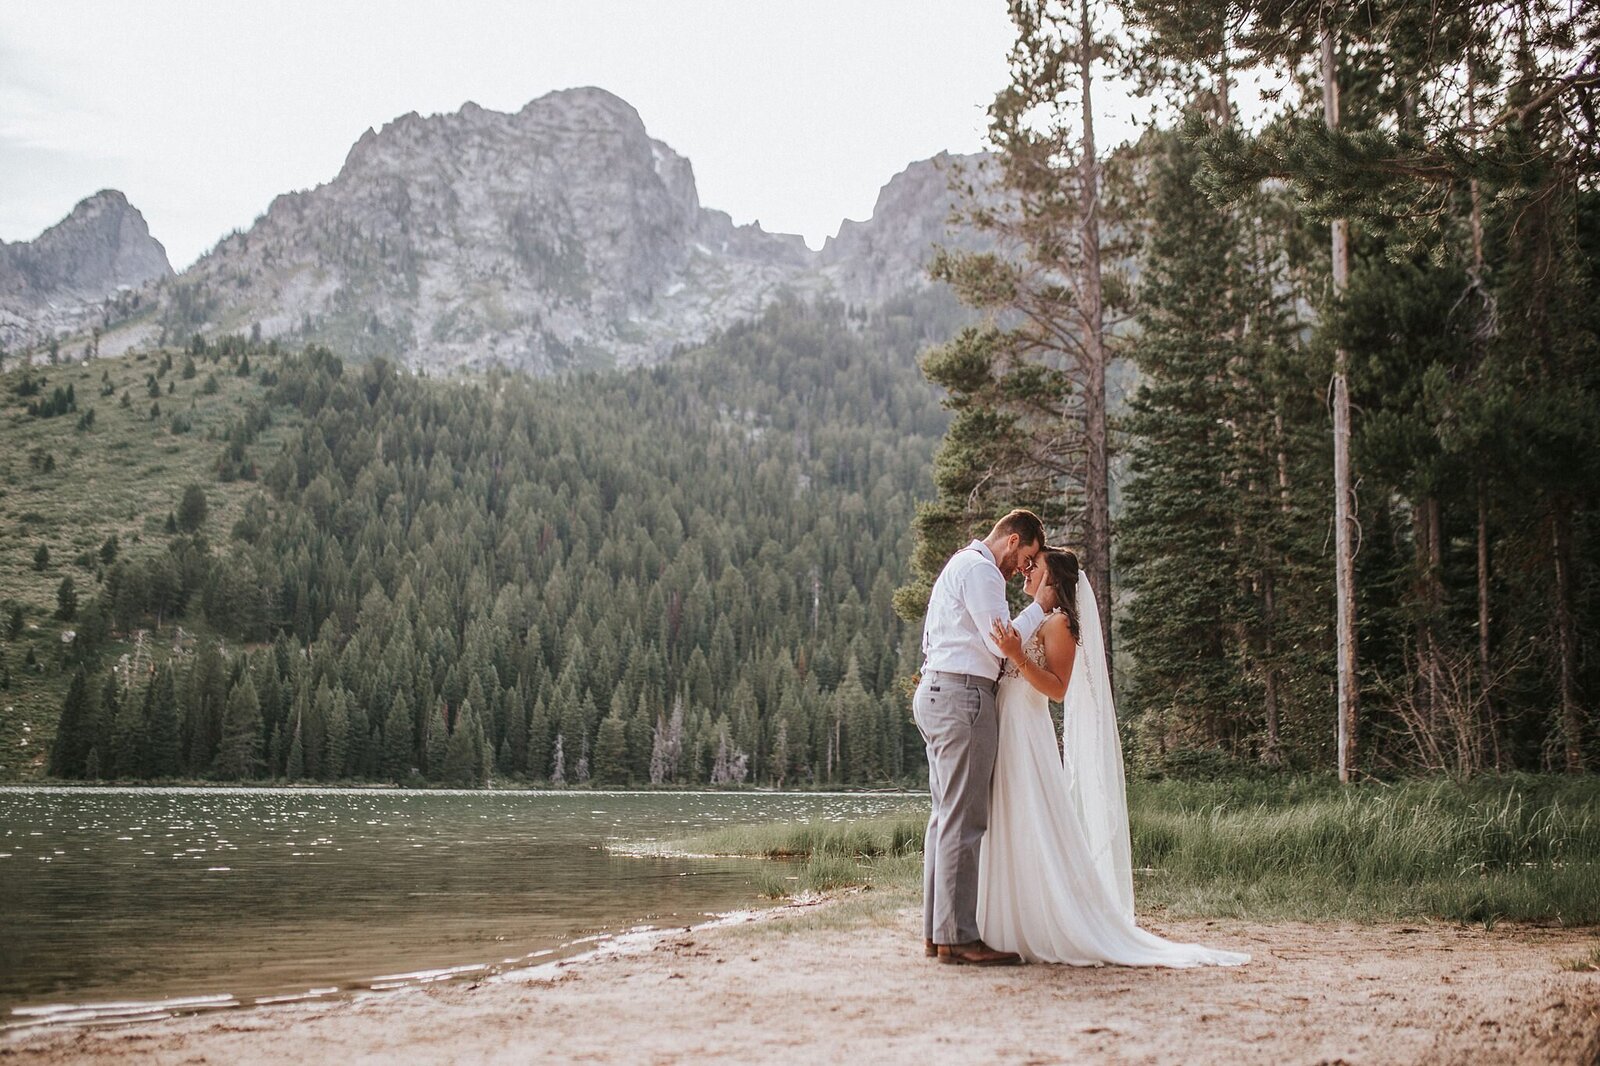 Sacramento Wedding Photographer captures national park elopement with bride and groom's private first dance